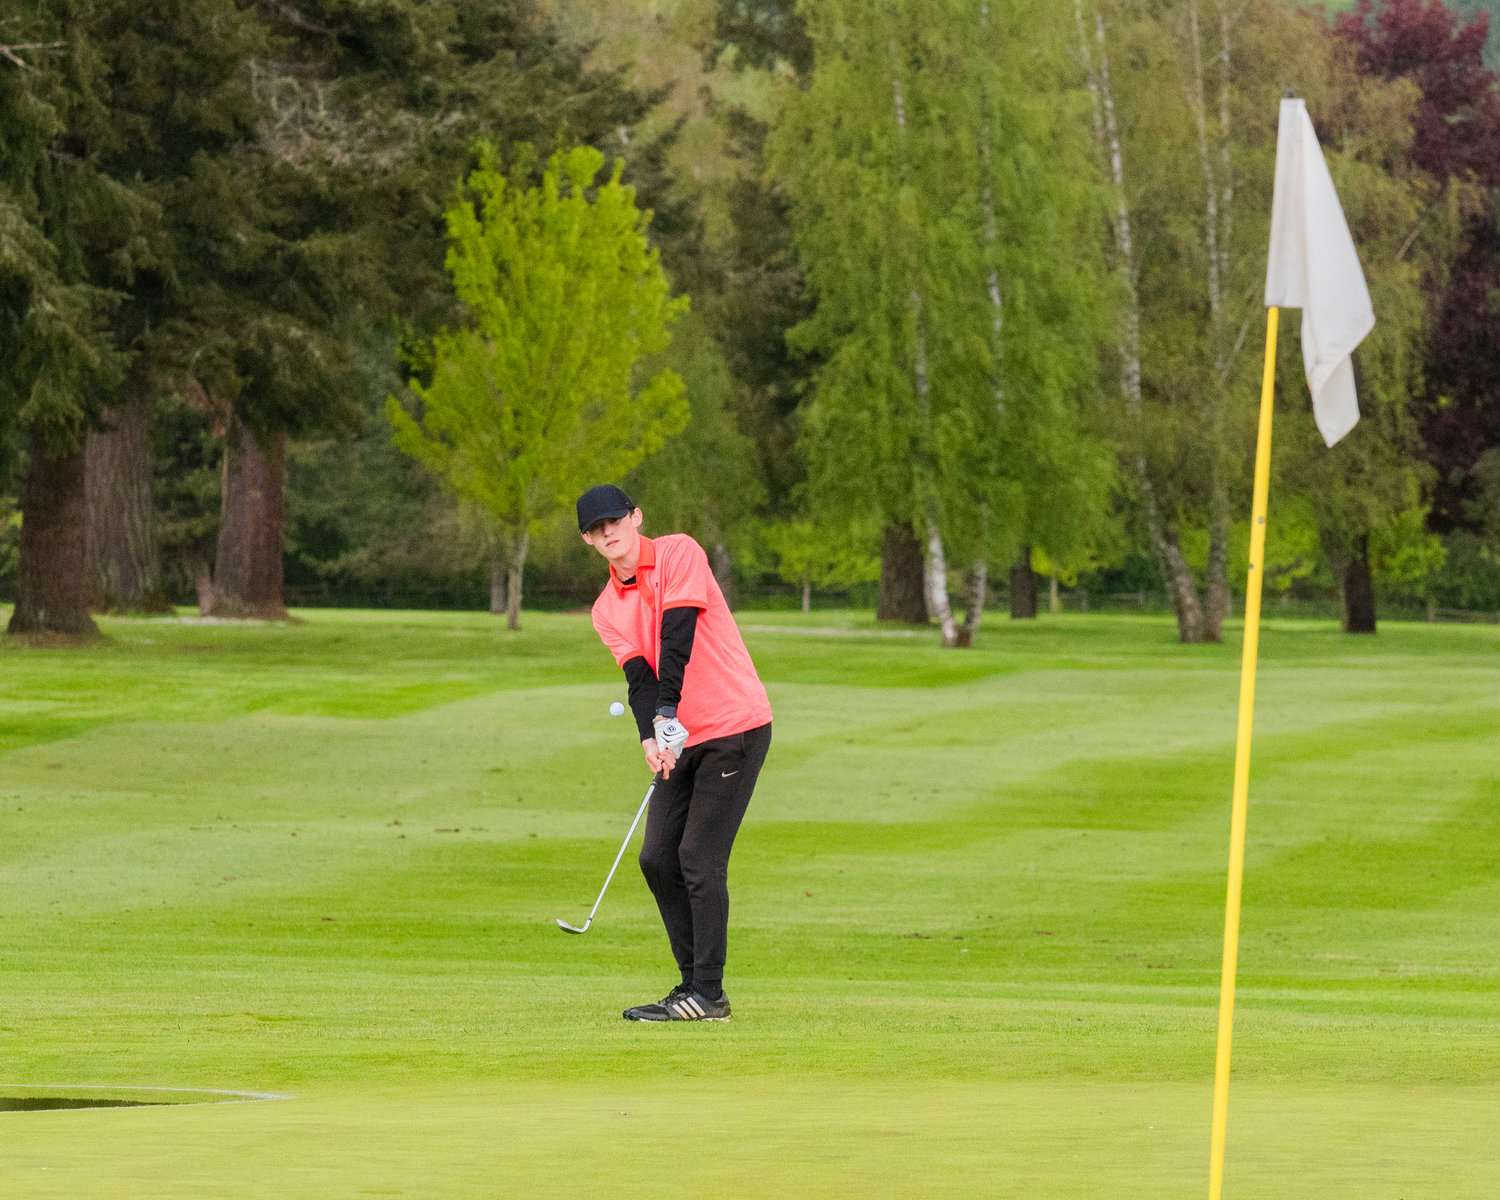 Wahkiakum sophomore Kyler Sause hits the ball up towards a flag at Riverside Golf Course in Chehalis on Wednesday.